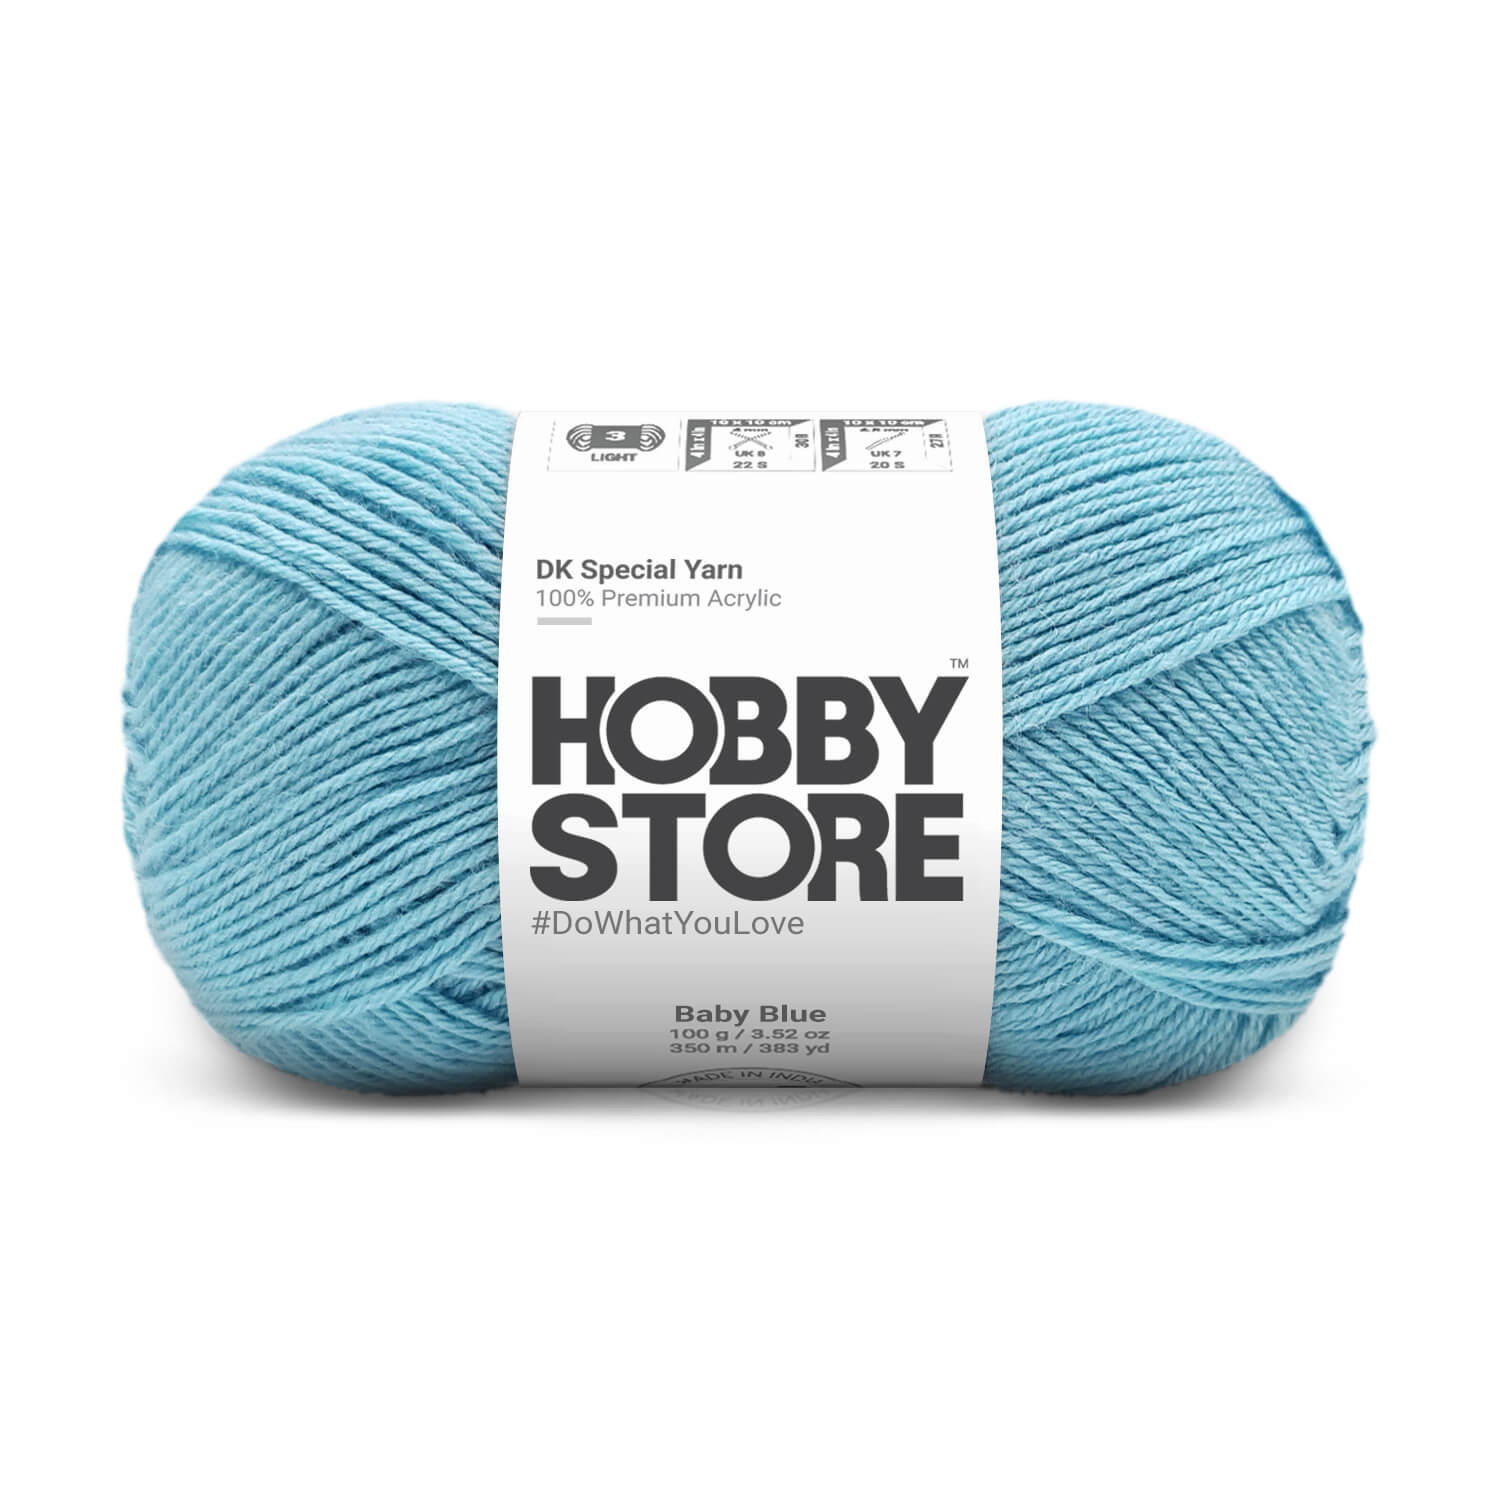 Hobby Store DK Special Yarn - Baby Blue 5028